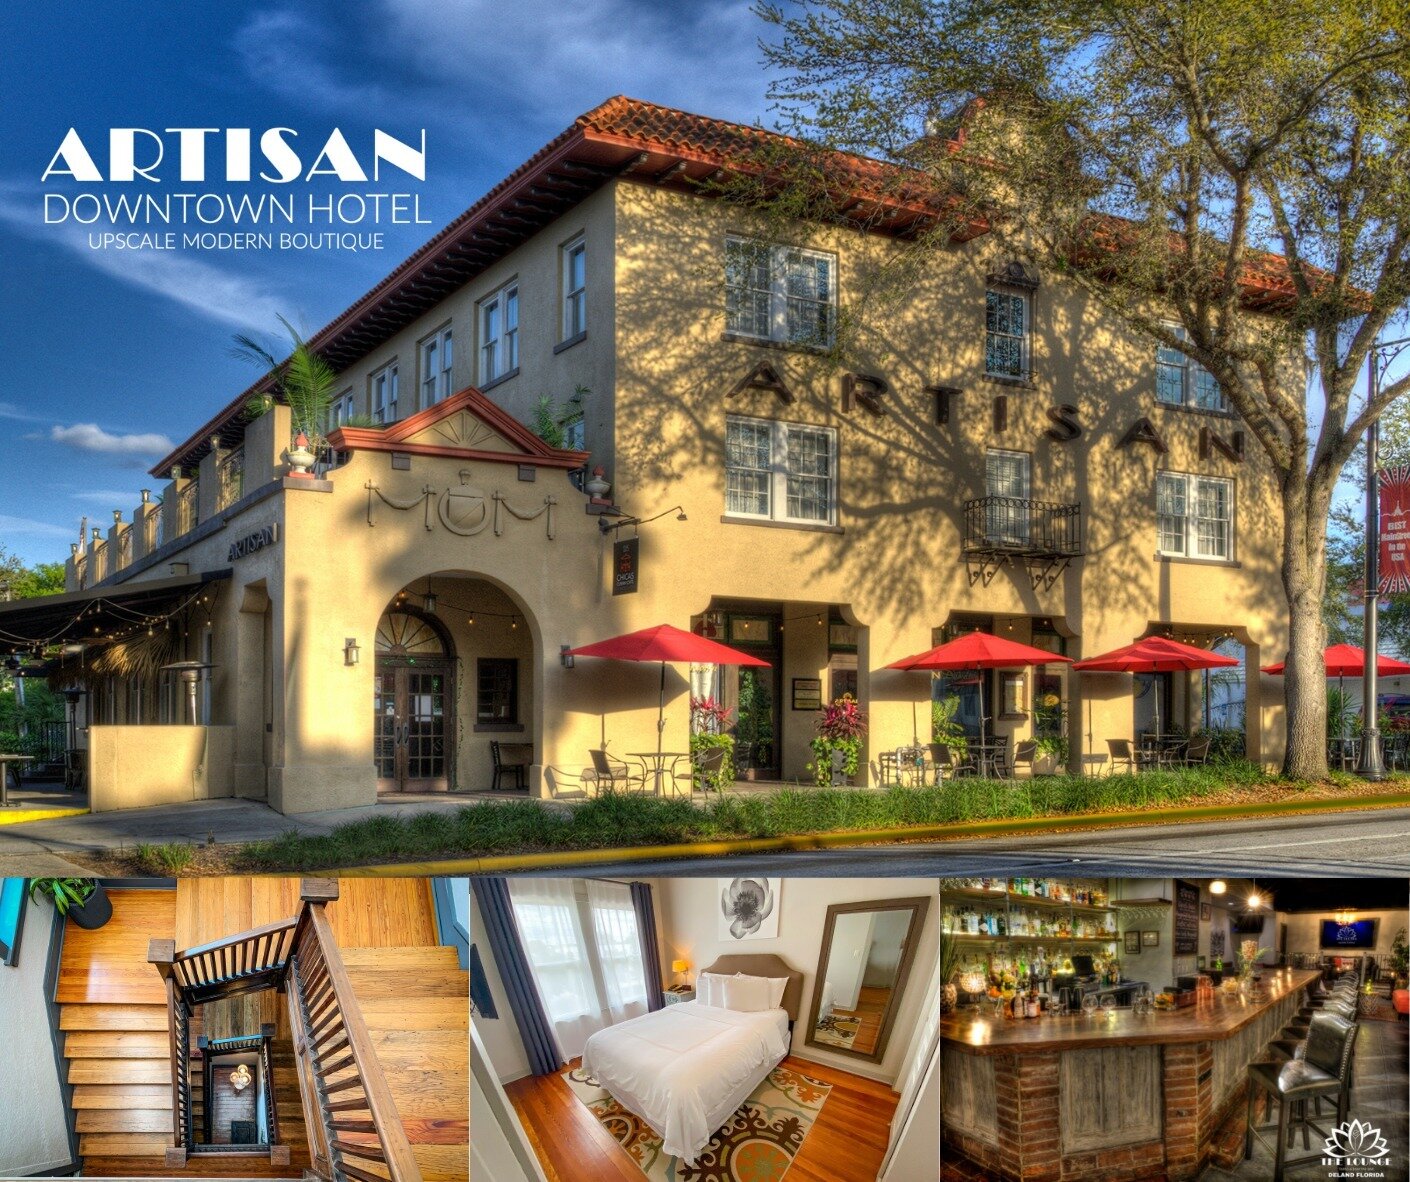 Ready for an adventure unlike anything you've experienced before? Come by The Historic Artisan Downtown Hotel and enjoy the comfort of a luxurious 14-room boutique lodging right in vibrant downtown DeLand! We'll tailor our services specifically to yo